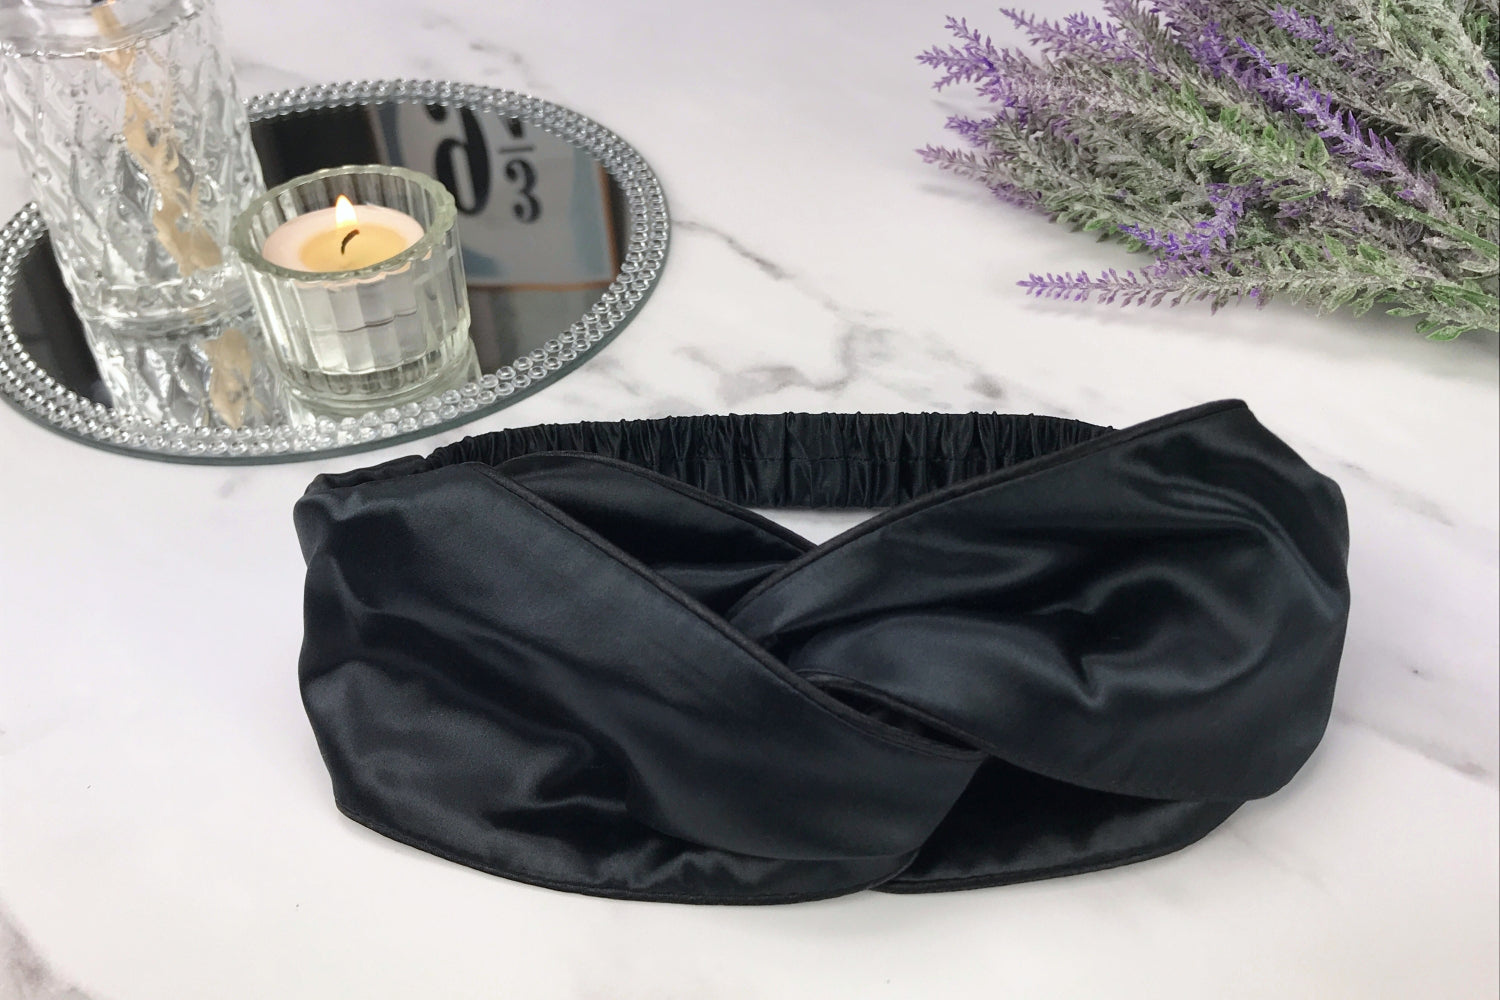 celestial silk twisted black silk headband for hair on counter with lavender and candle